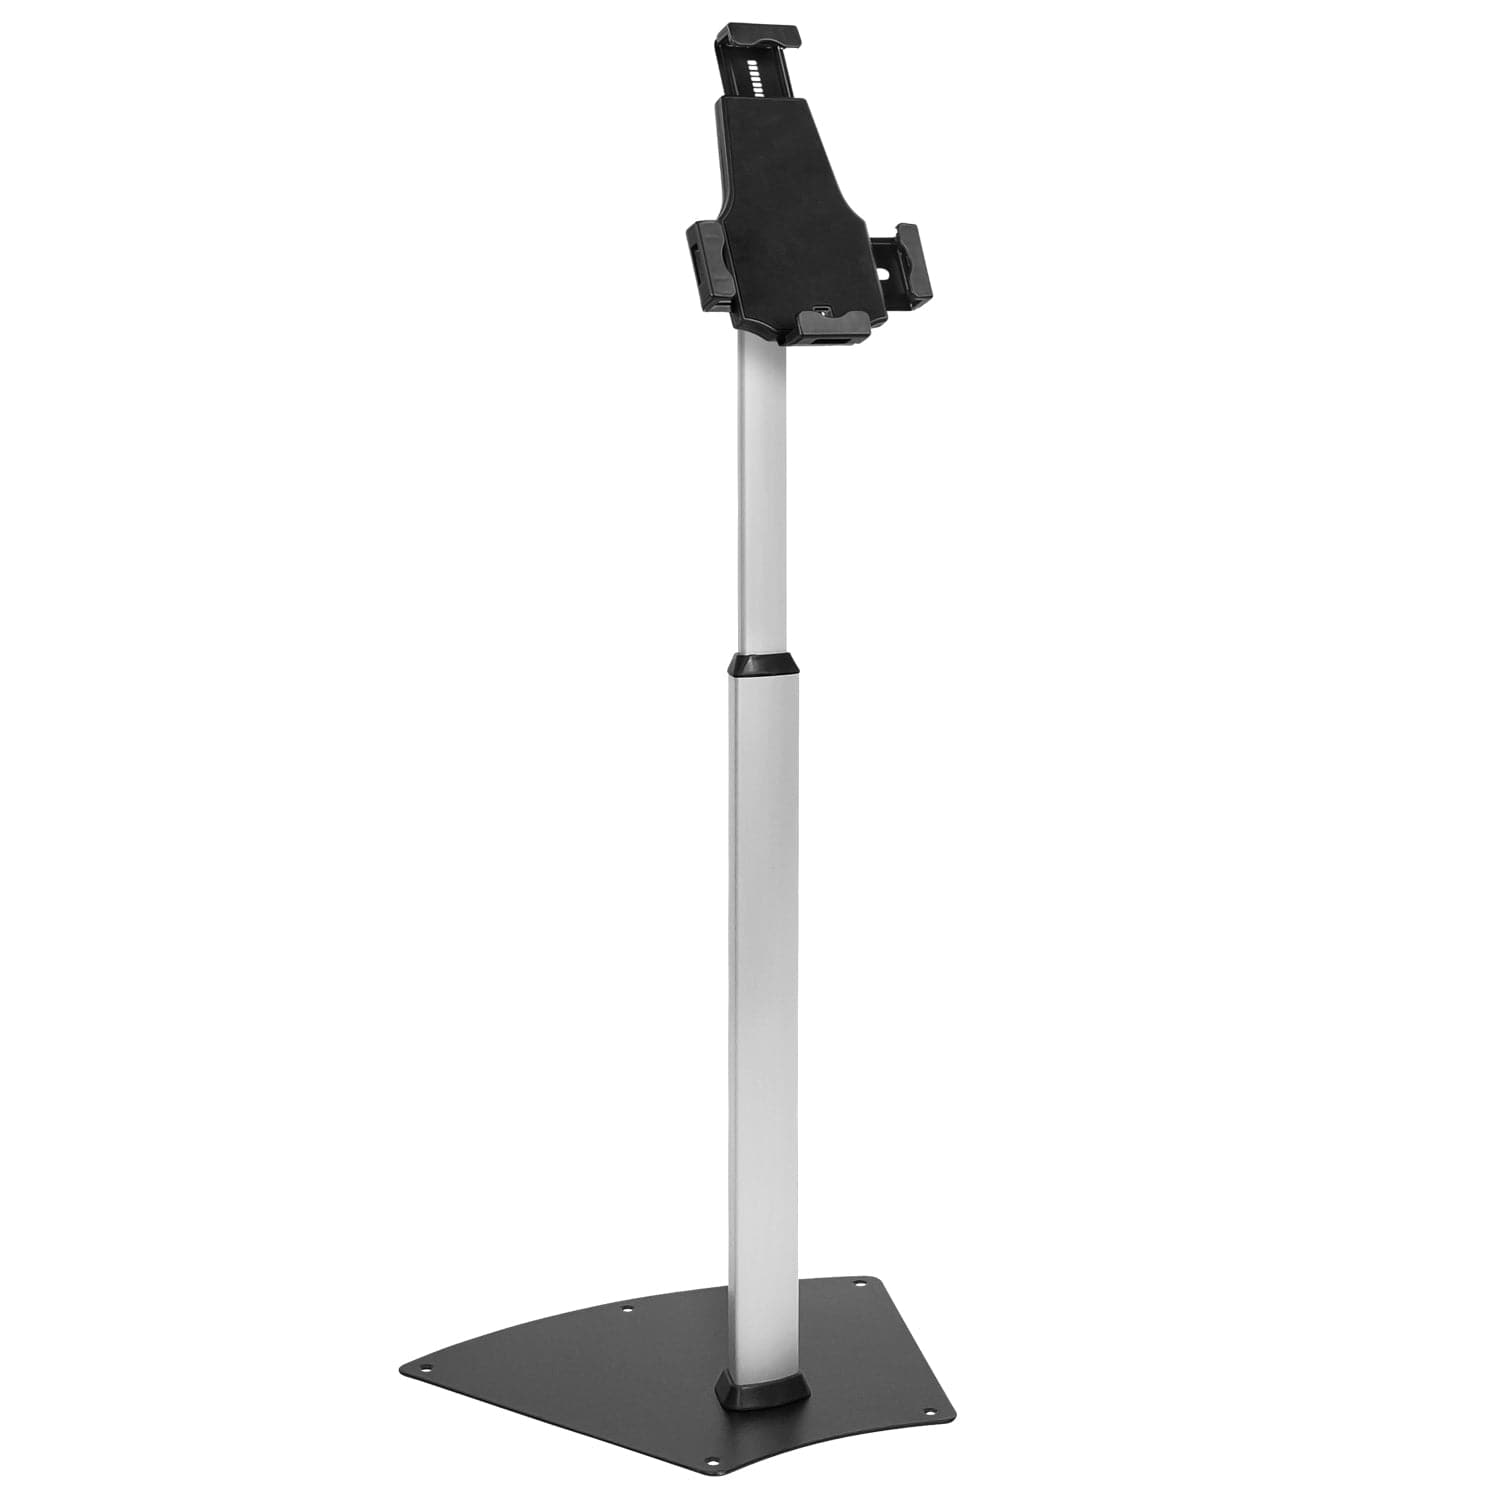 Secure Universal Tablet Floor Stand With Lock